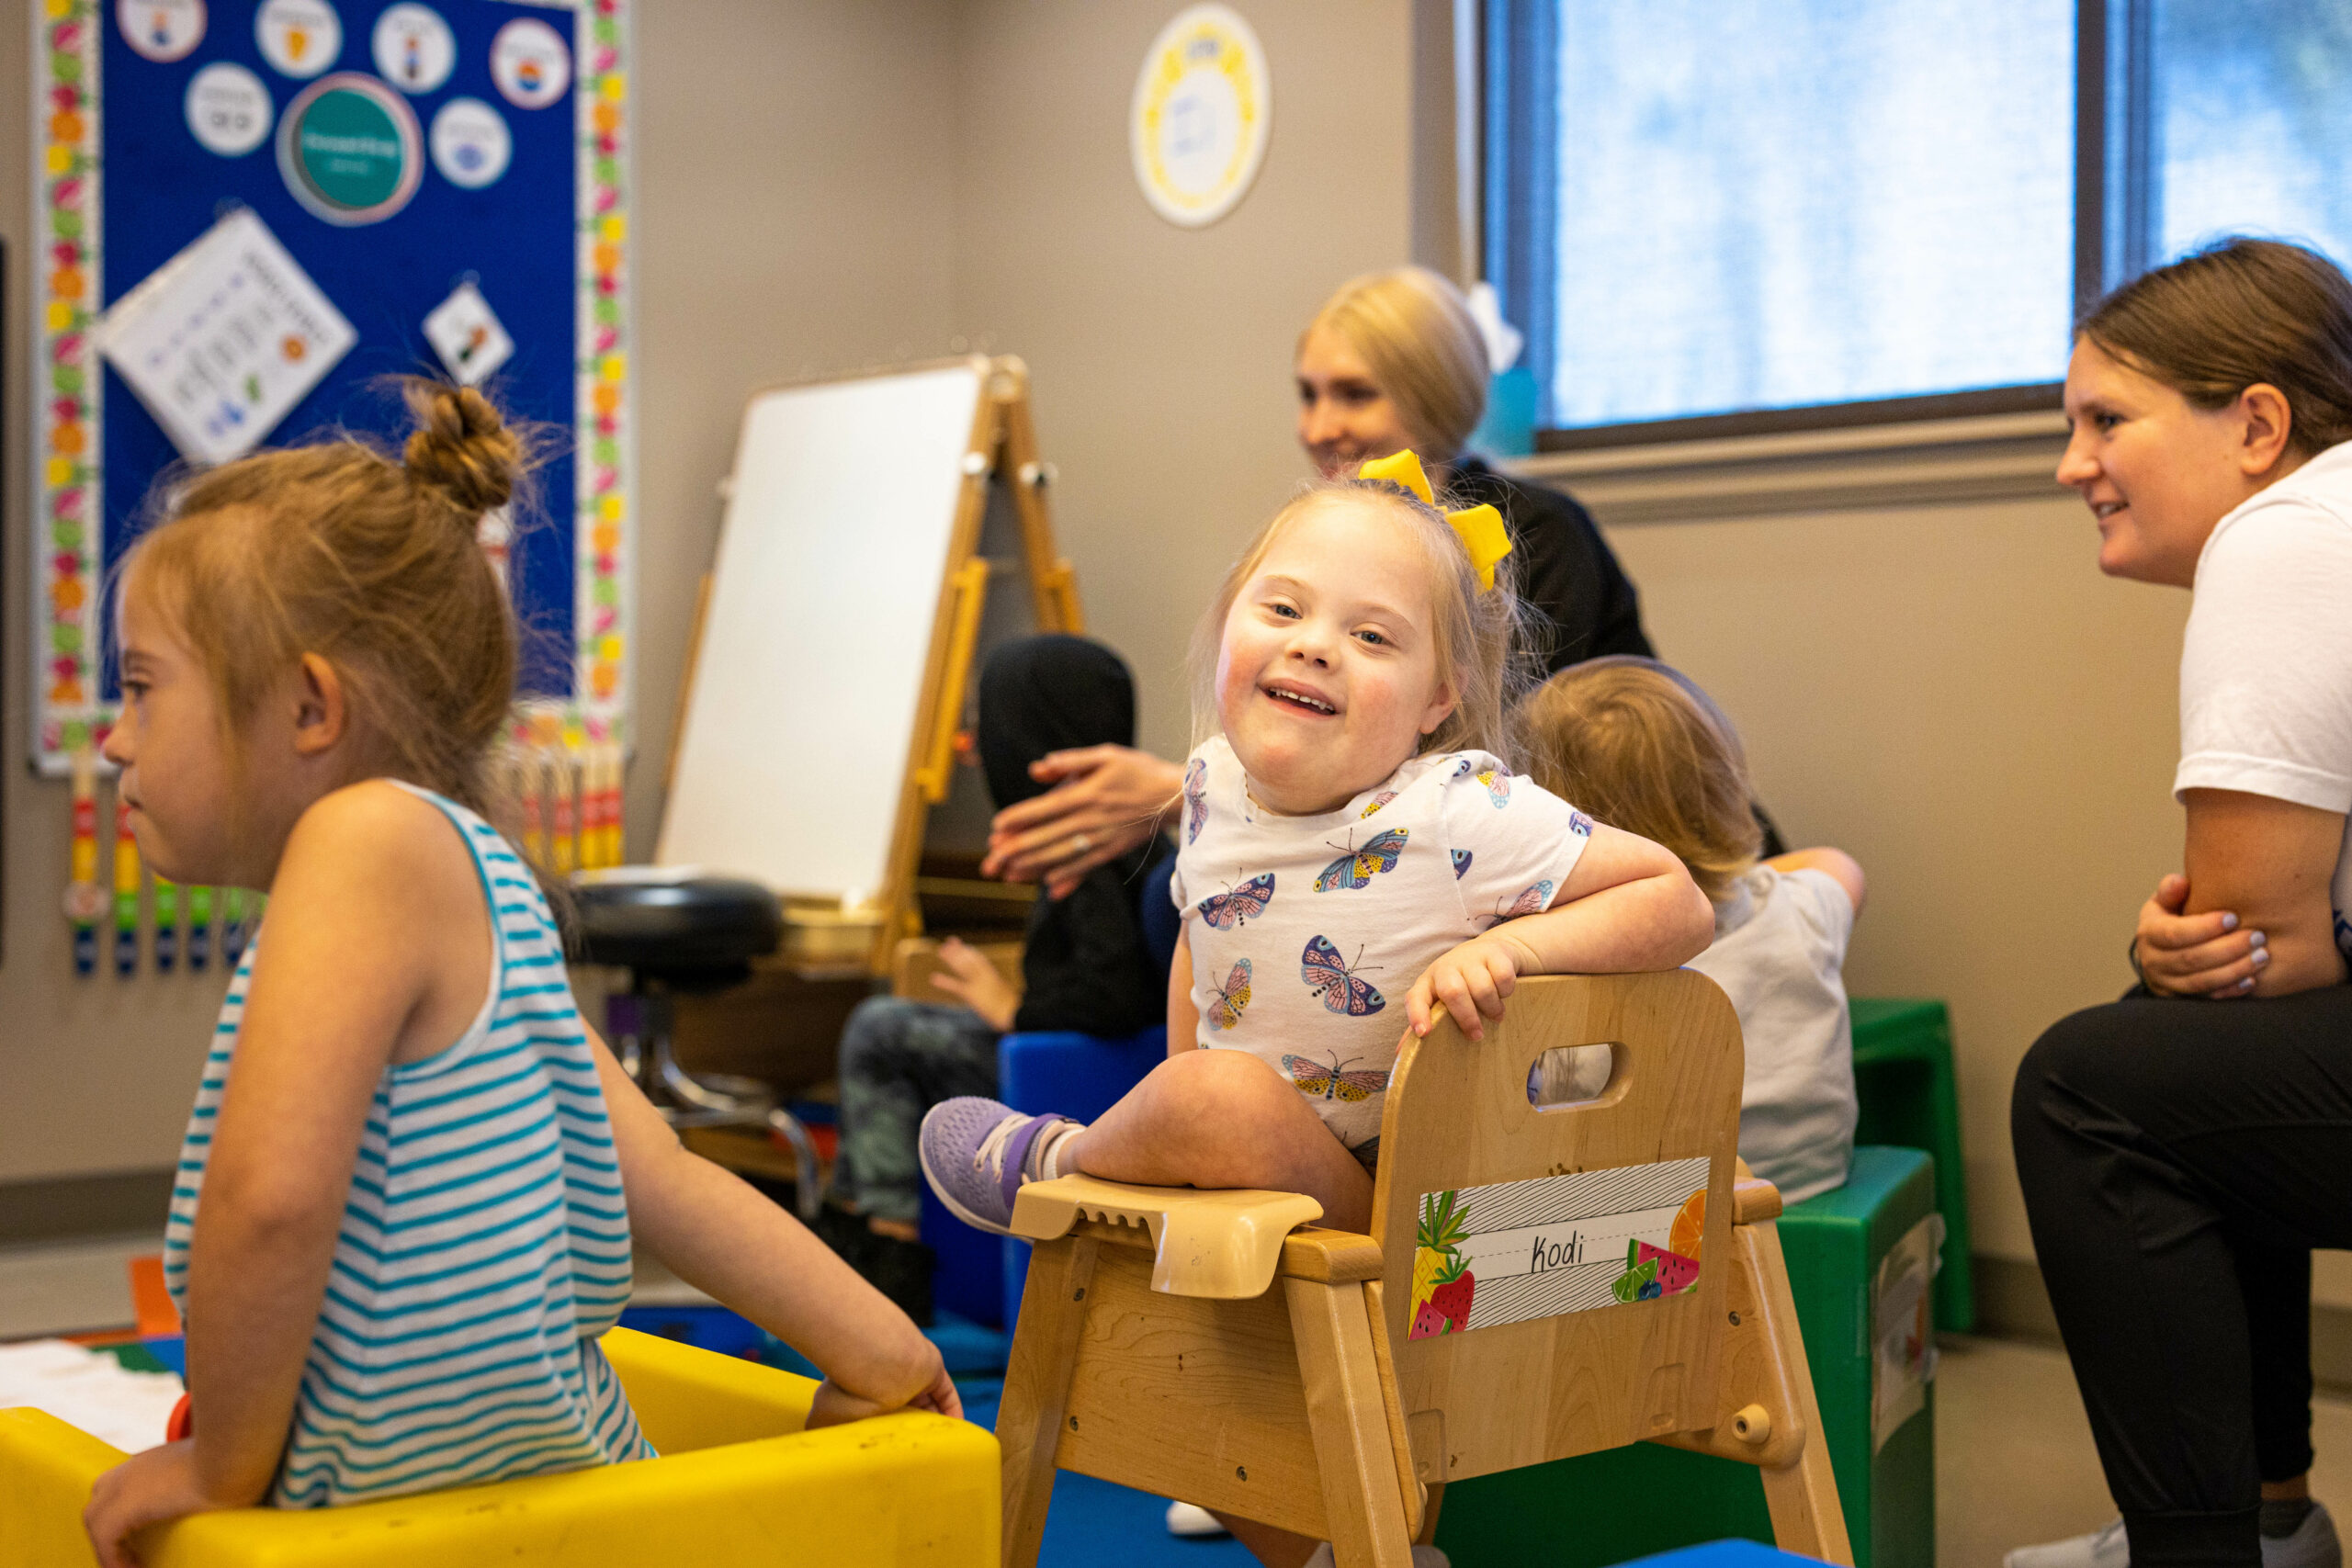 Little girl with Down Syndrome smiling in her seat during circle time in an early intervention classroom